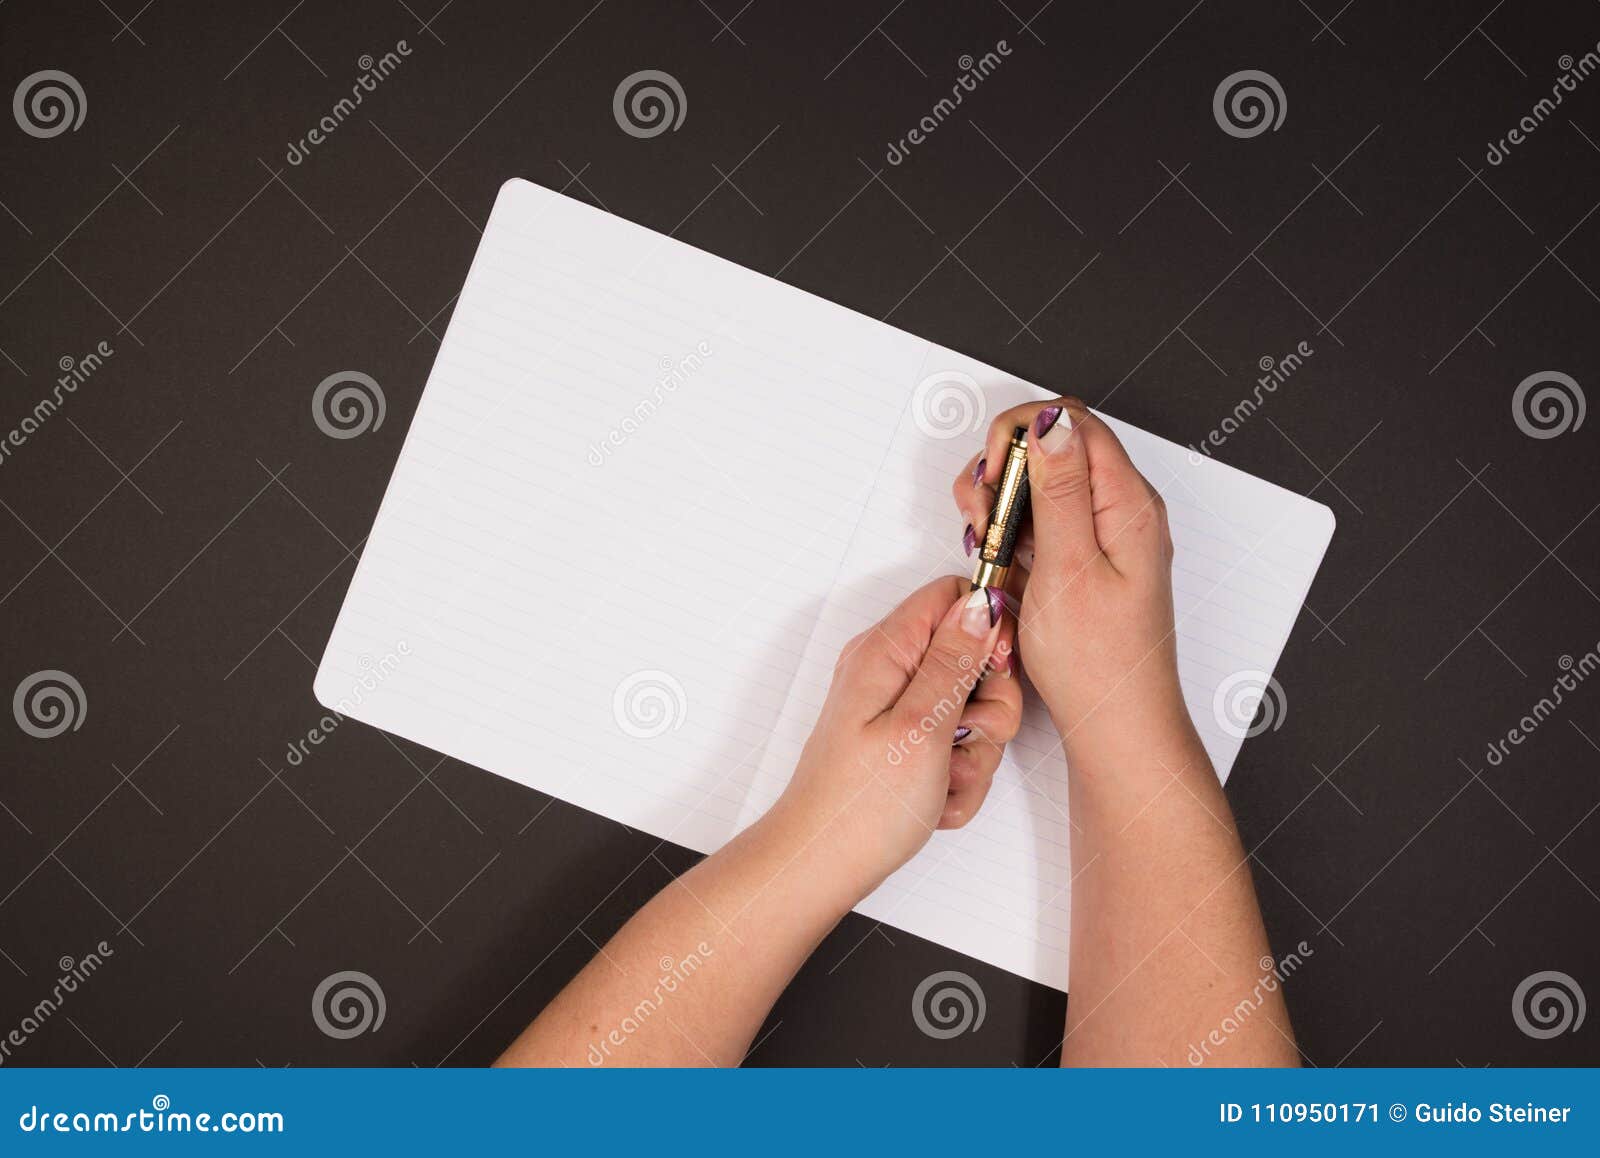 Woman Holds a Ink Pen Over Her Notebook Stock Image - Image of nails ...